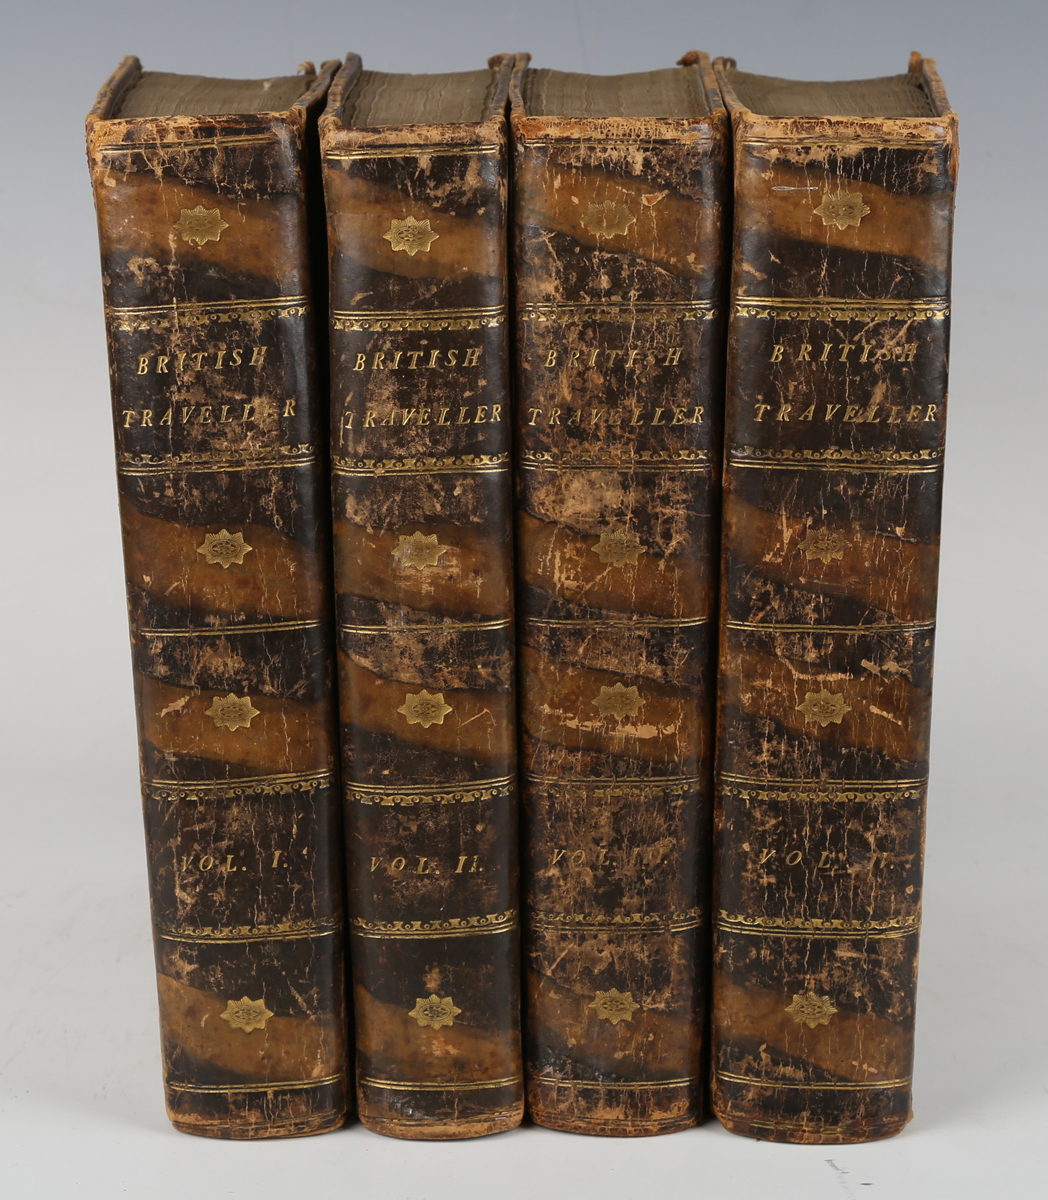 BINDINGS. - James DUGDALE. The New British Traveller, or Modern Panorama of England and Wales.